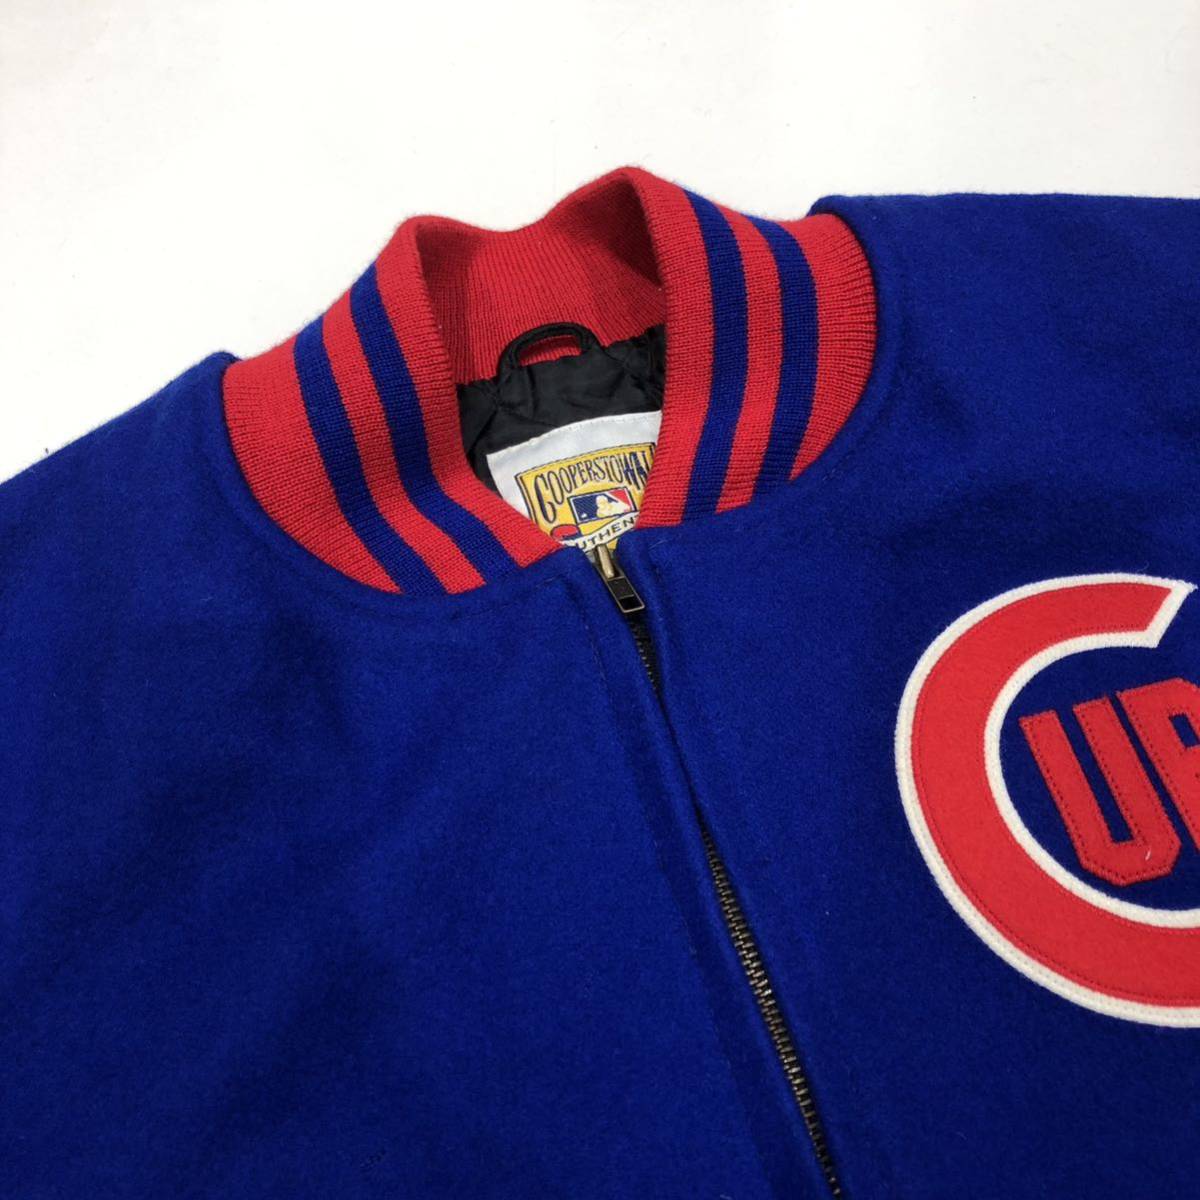 【mitchell and ness】ミッチェルアンドネス cubs jacket cooperstown authentic collection スタジャン XXL ブルー レッド ts202401_画像3